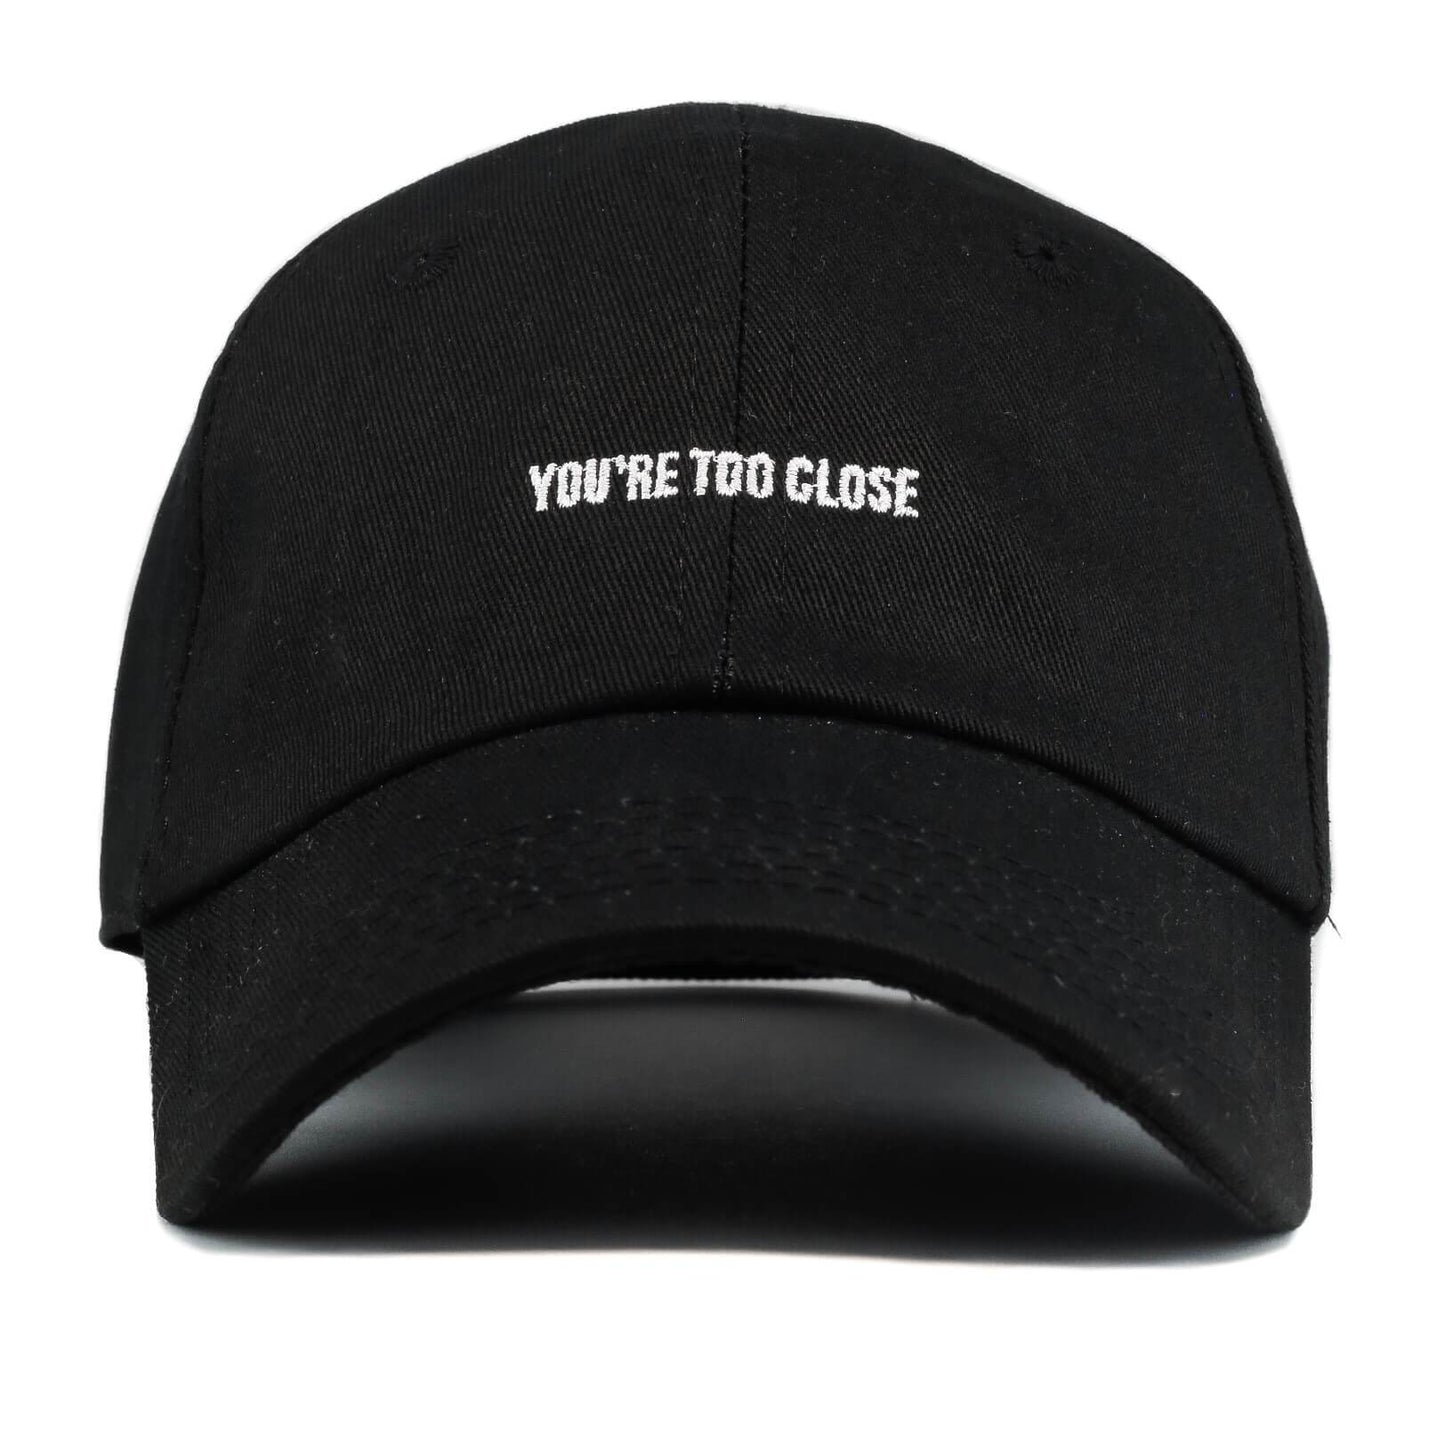 Too Close (LIMITED)